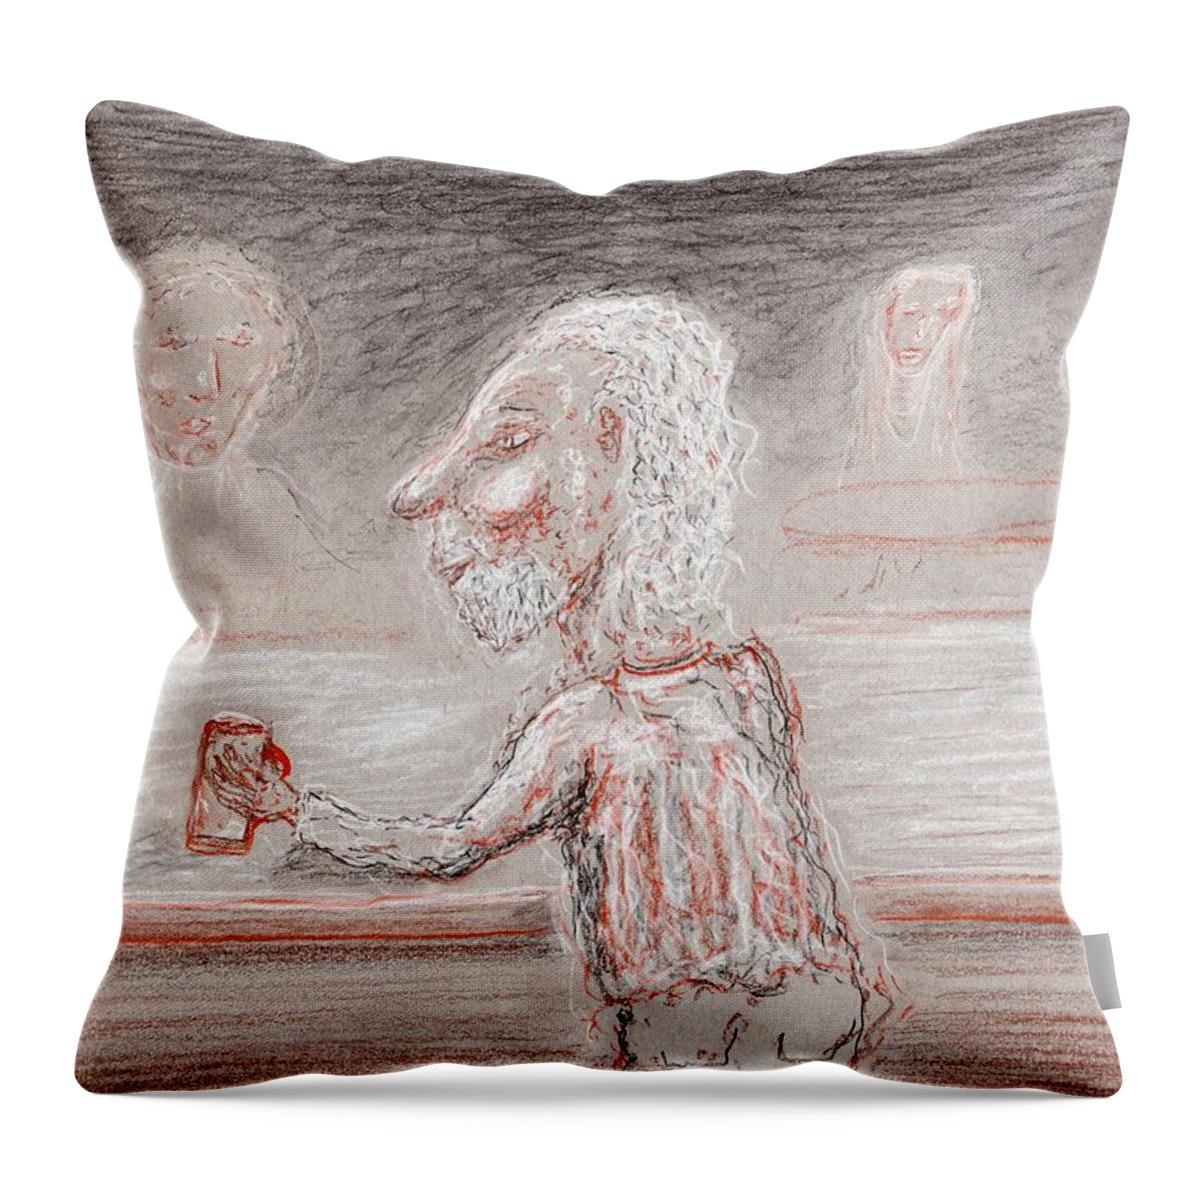 Jim Taylor Throw Pillow featuring the drawing A Brew Please by Jim Taylor